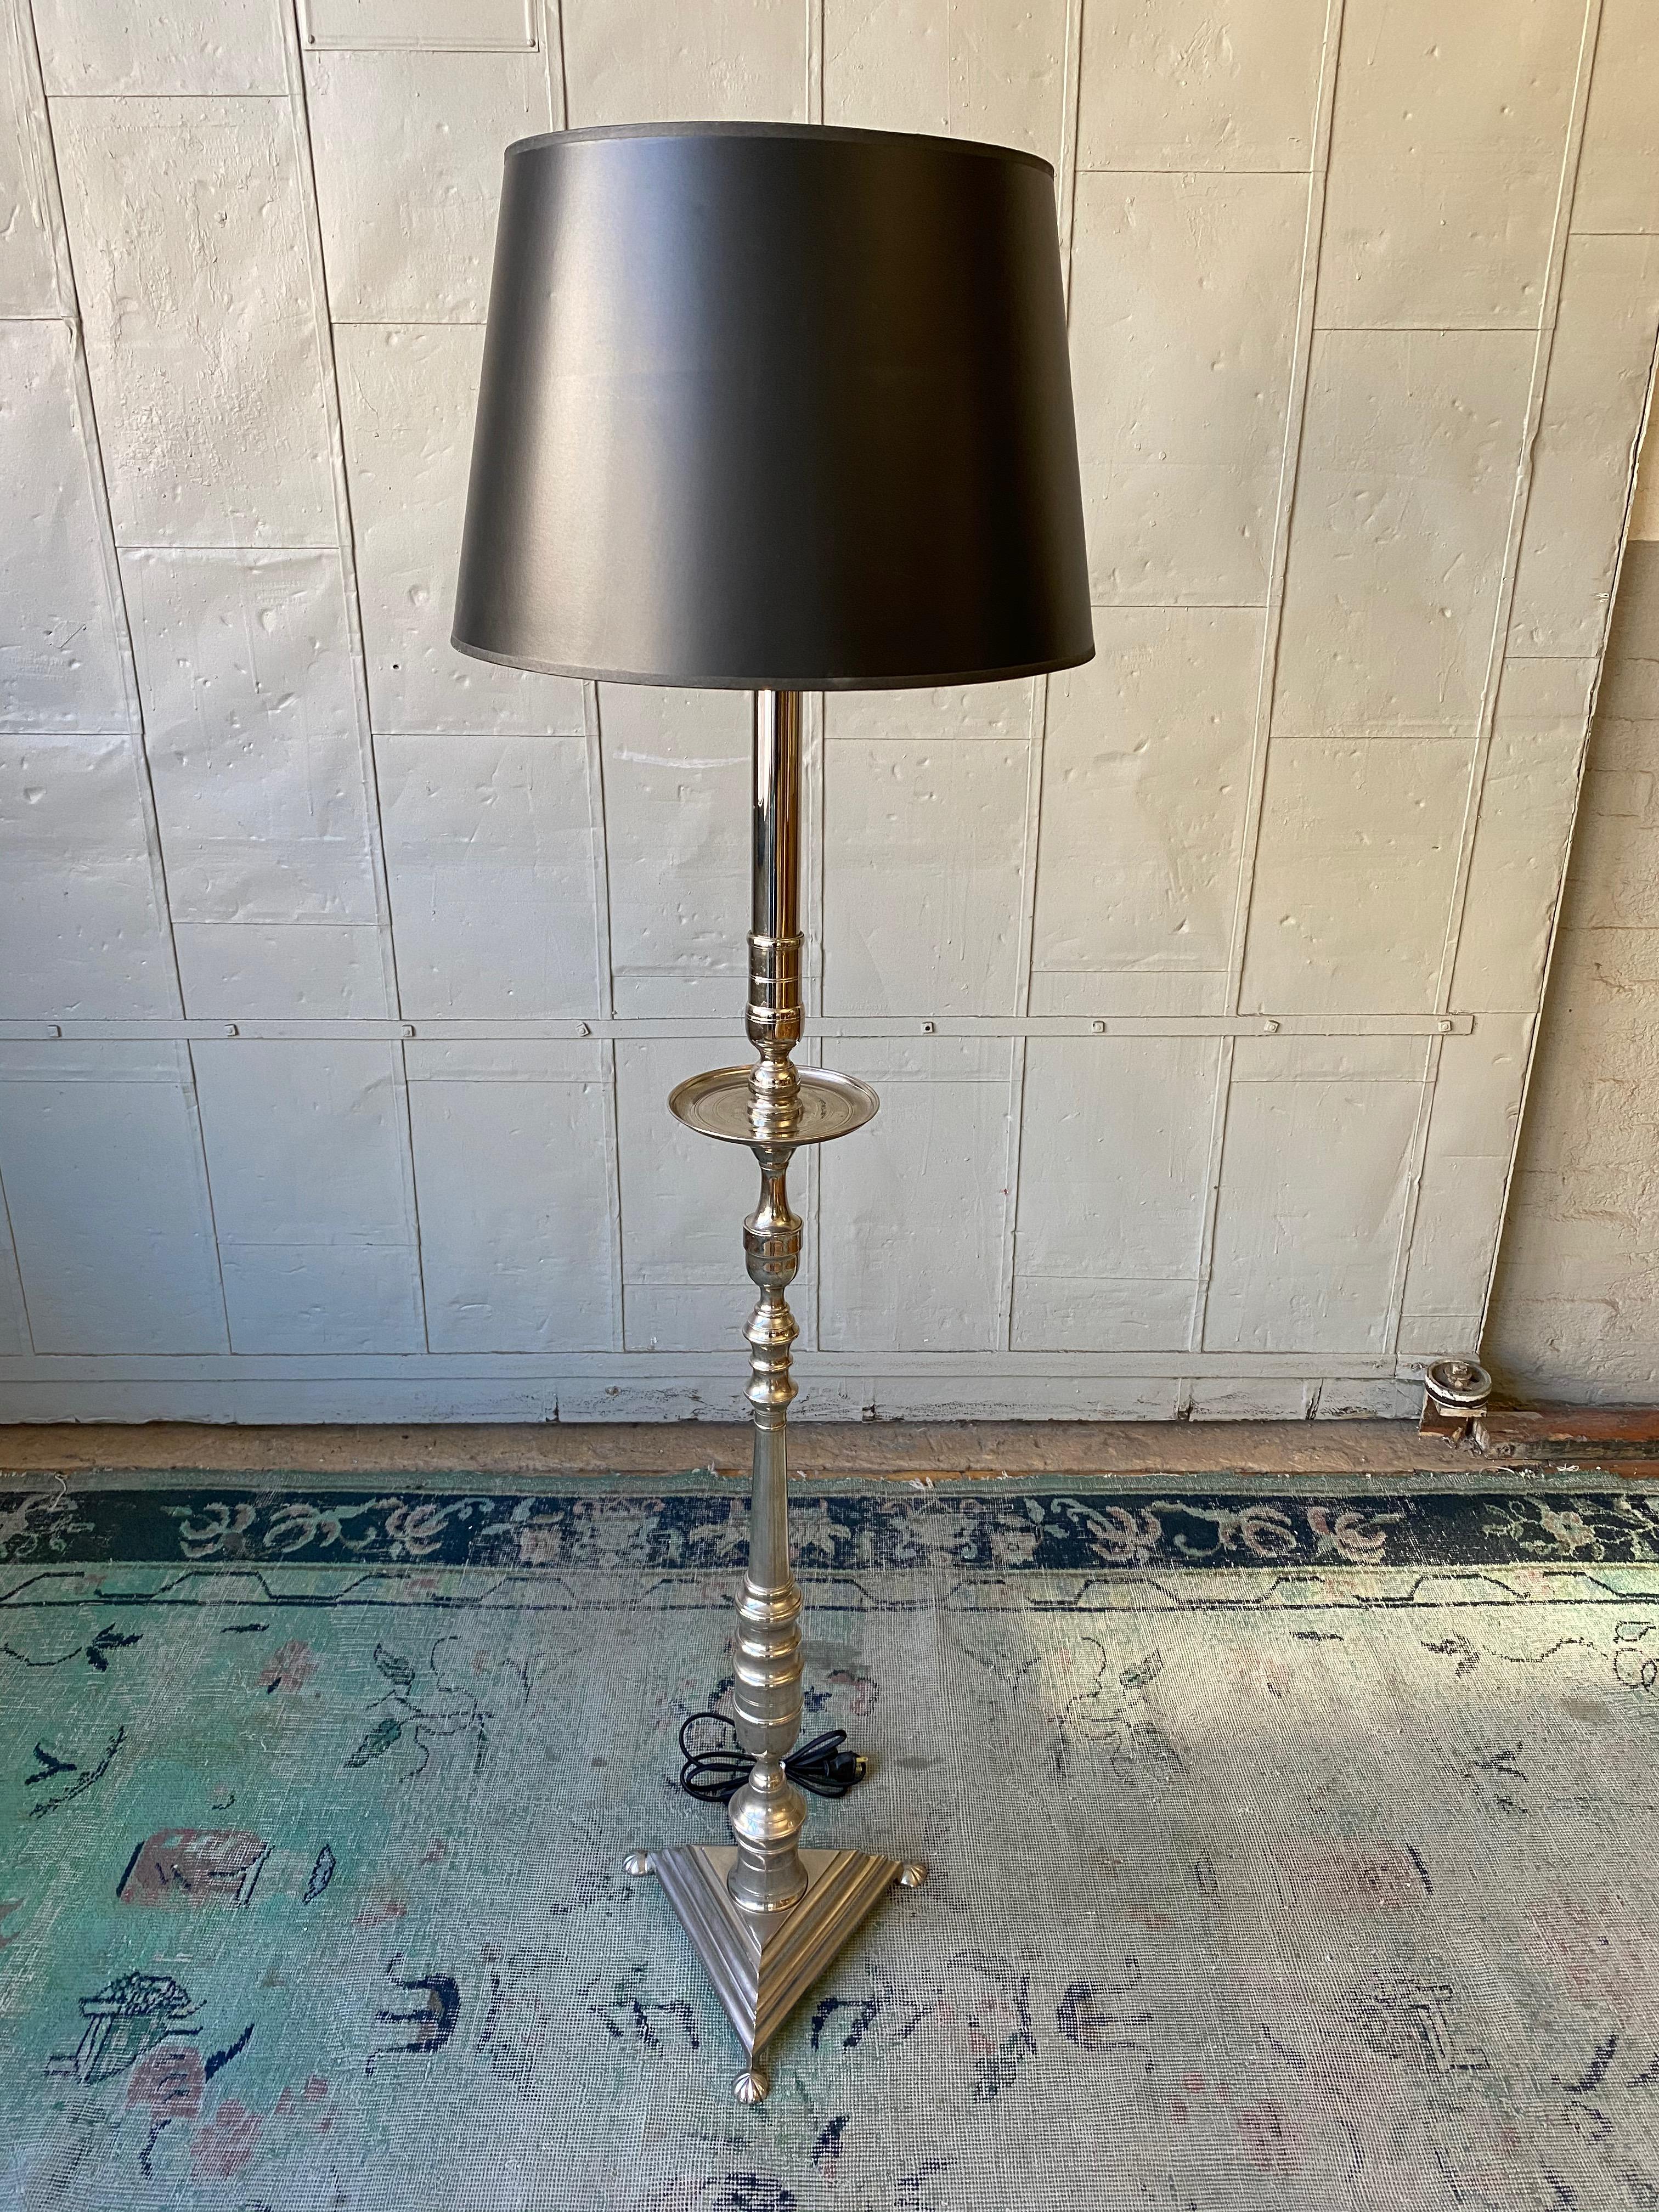 Mid-20th Century French Nickel-Plated Floor Lamp on a Footed Triangular Base For Sale